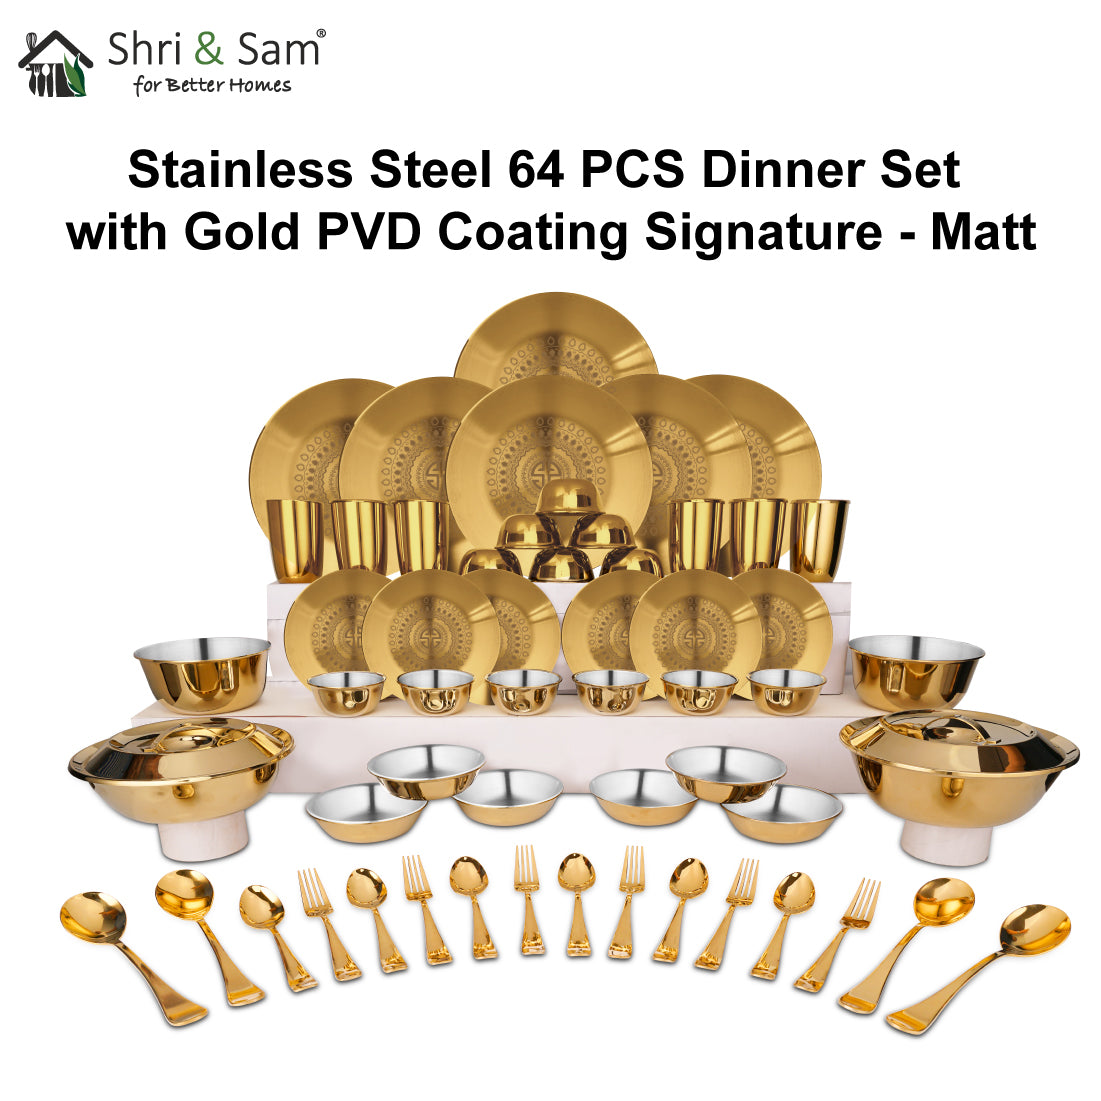 Stainless Steel 64 PCS Dinner Set (6 People) with Gold PVD Coating and Laser Signature - Matt